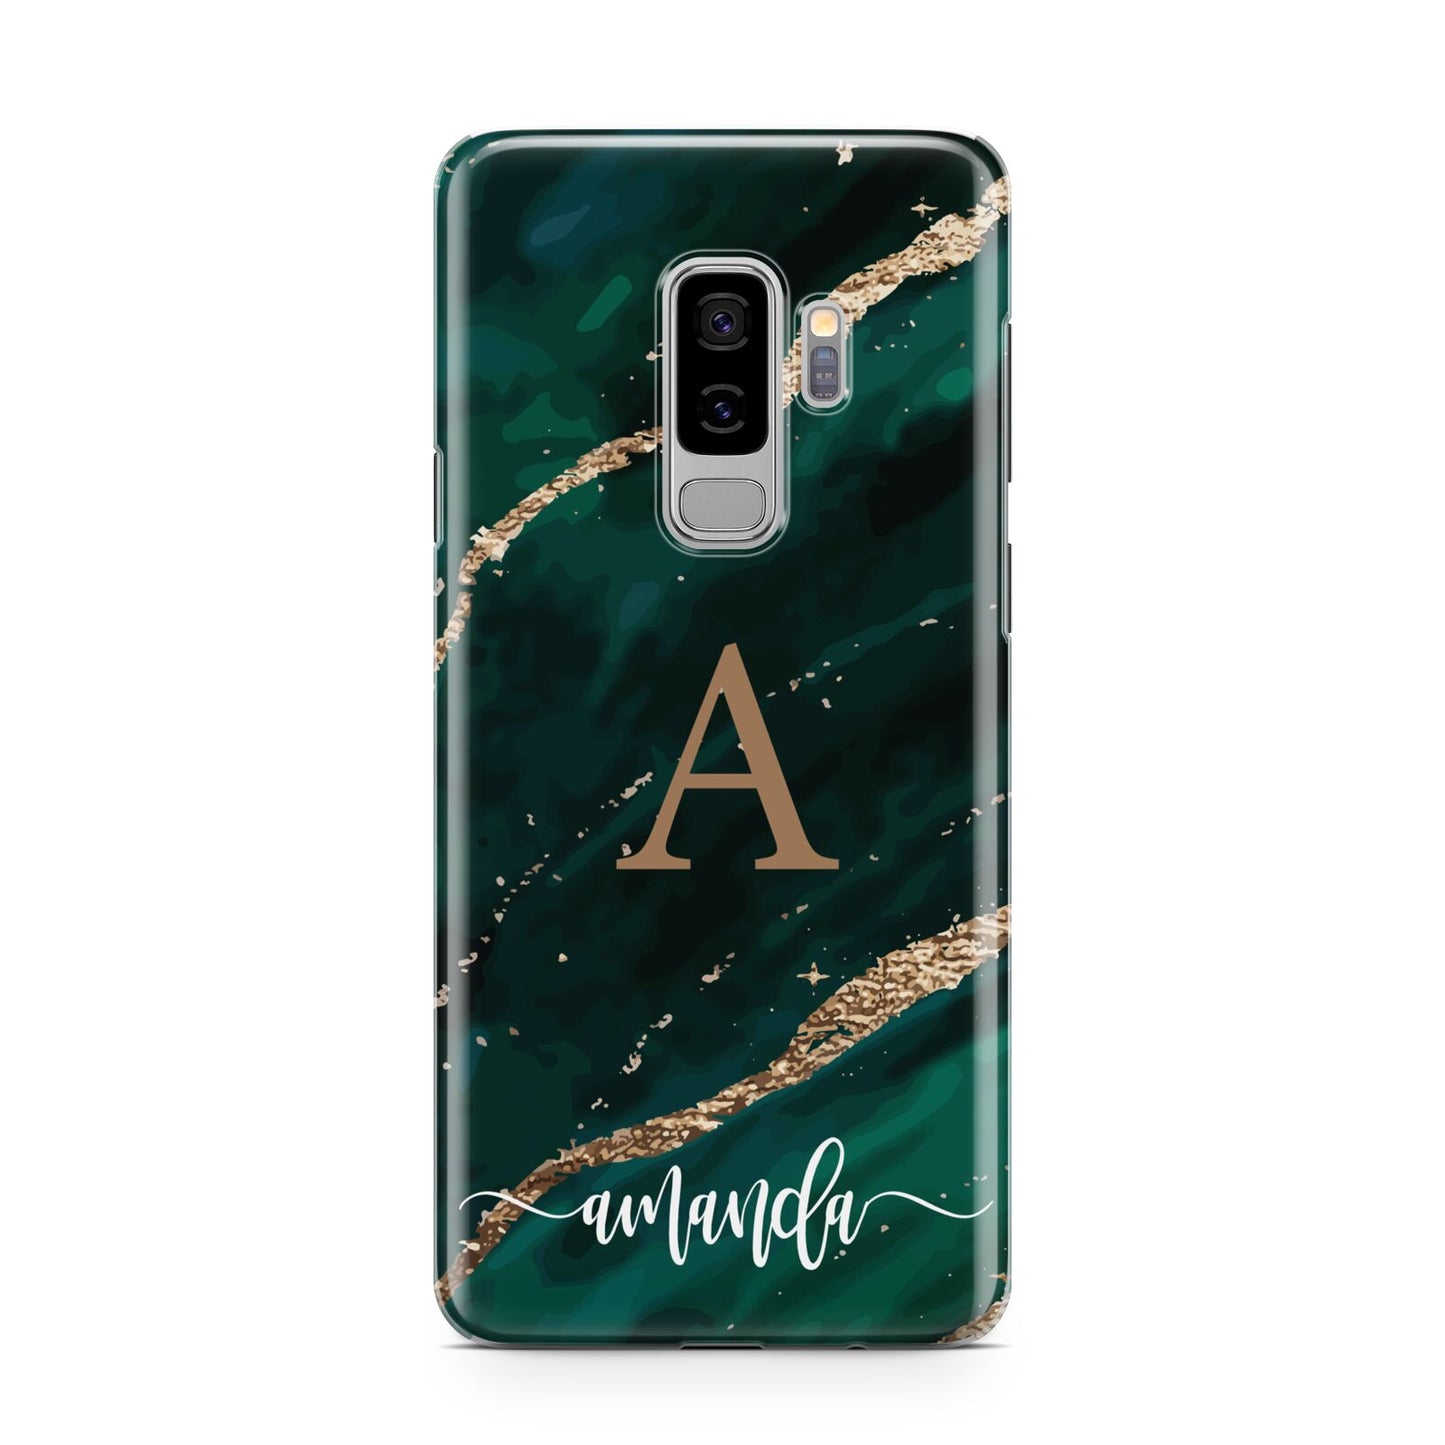 Green Marble Samsung Galaxy S9 Plus Case on Silver phone